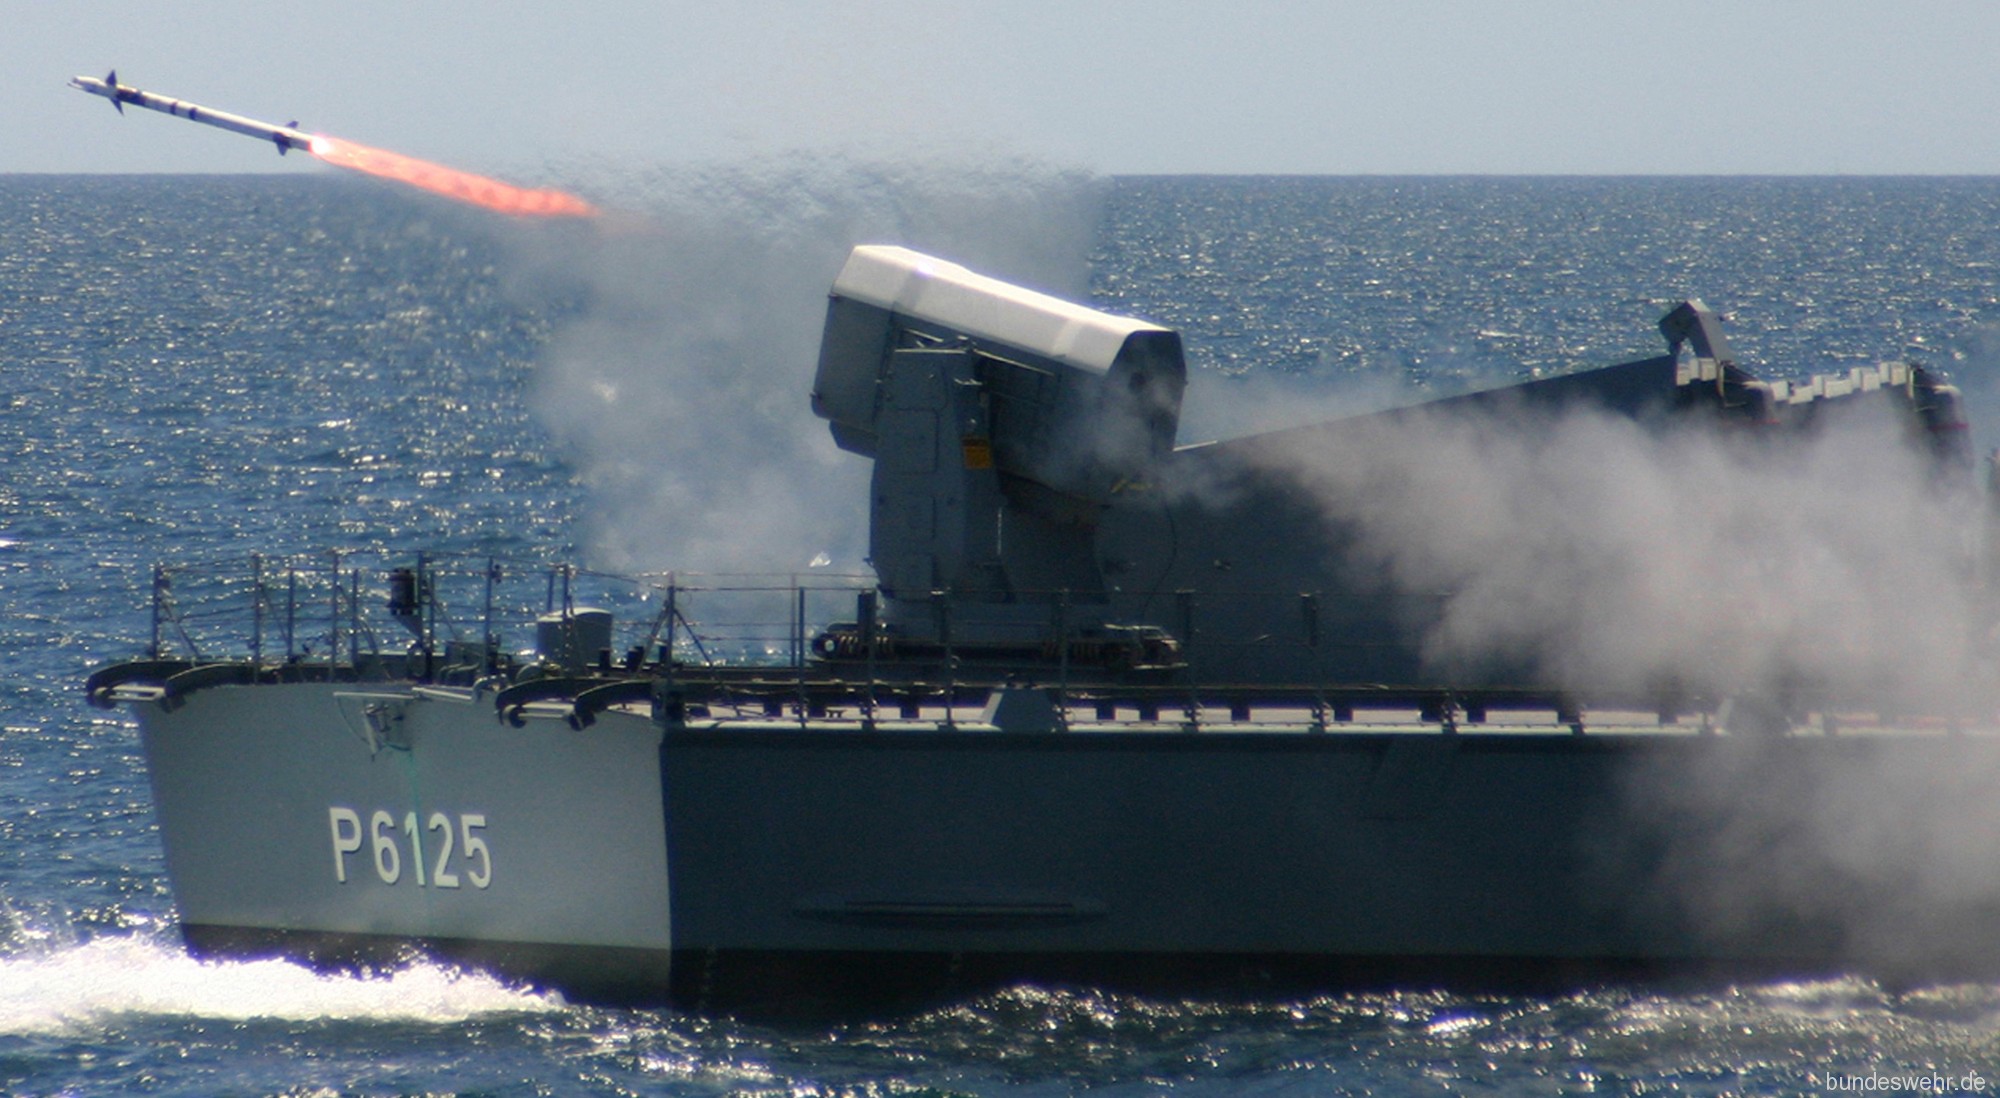 p6125 s75 fgs zobel type 143a gepard class fast attack missile craft german navy 10